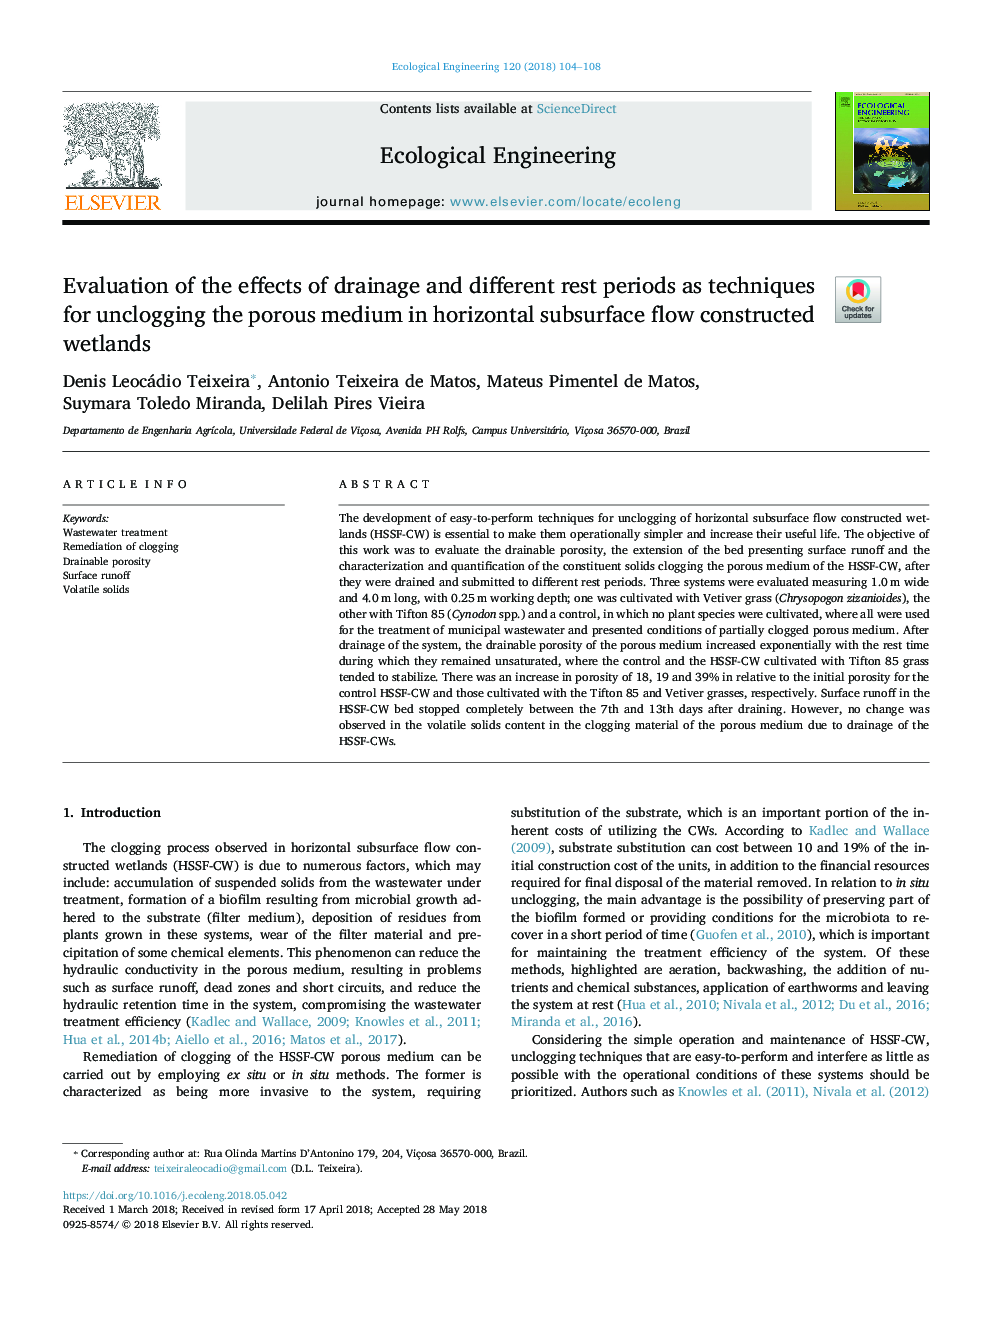 Evaluation of the effects of drainage and different rest periods as techniques for unclogging the porous medium in horizontal subsurface flow constructed wetlands